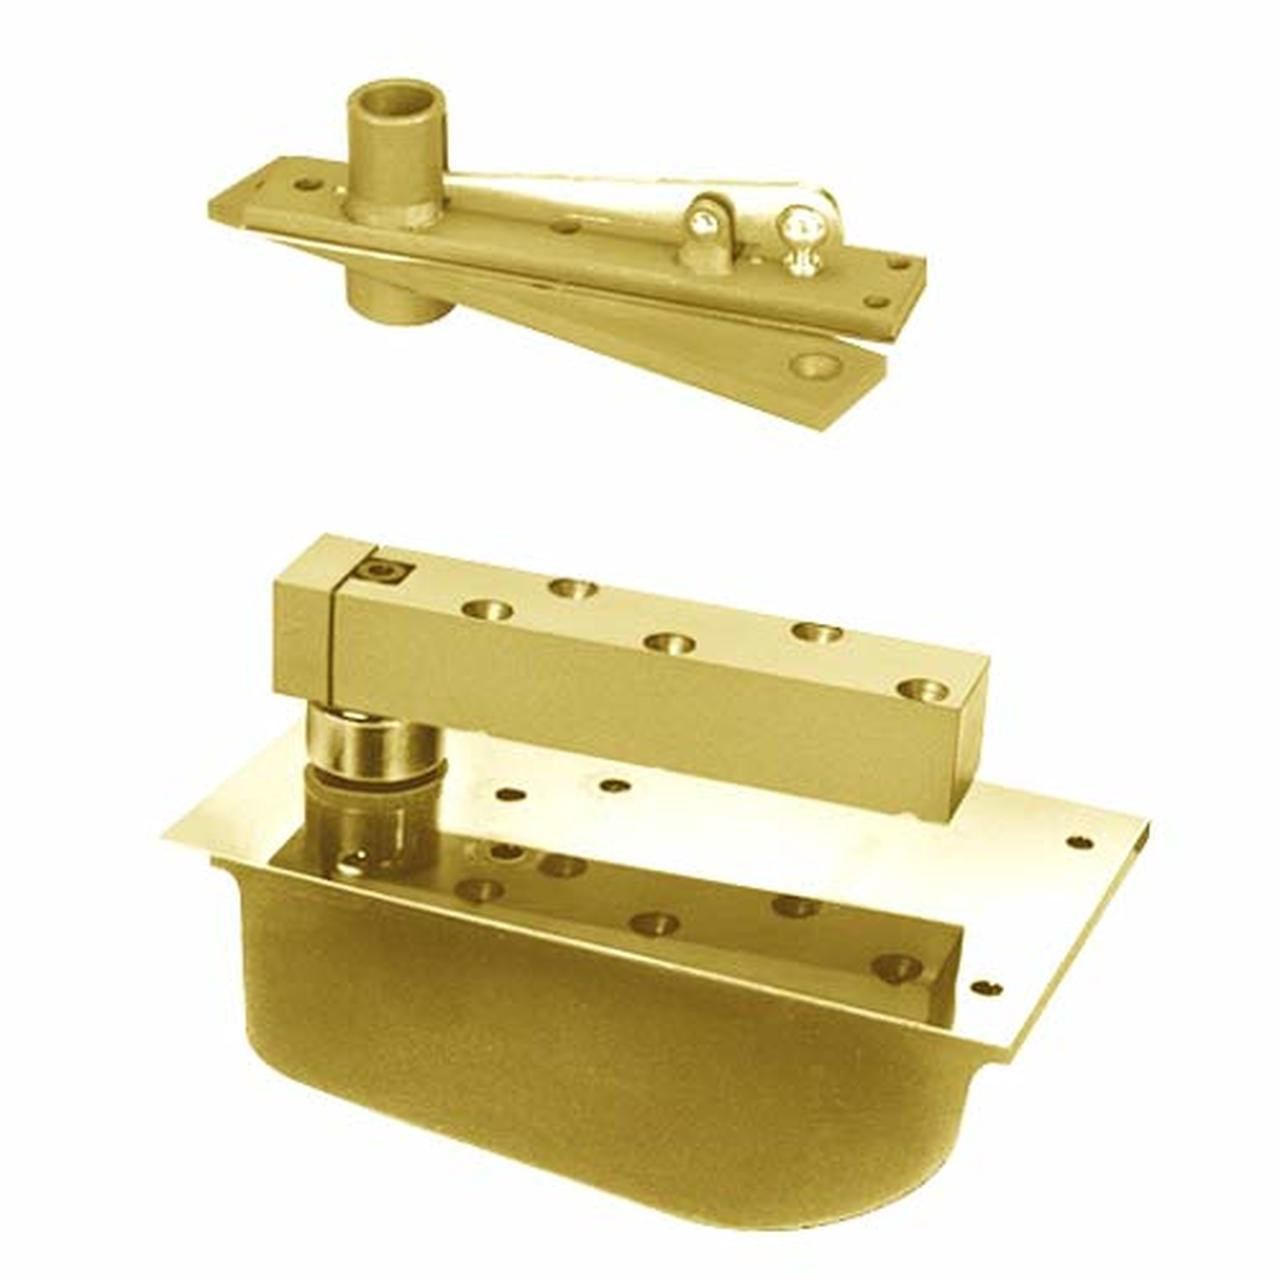 H28-85N-LFP-LCC-LH-605 Rixson 28 Series Heavy Duty Single Acting Center Hung Floor Closer in Bright Brass Finish